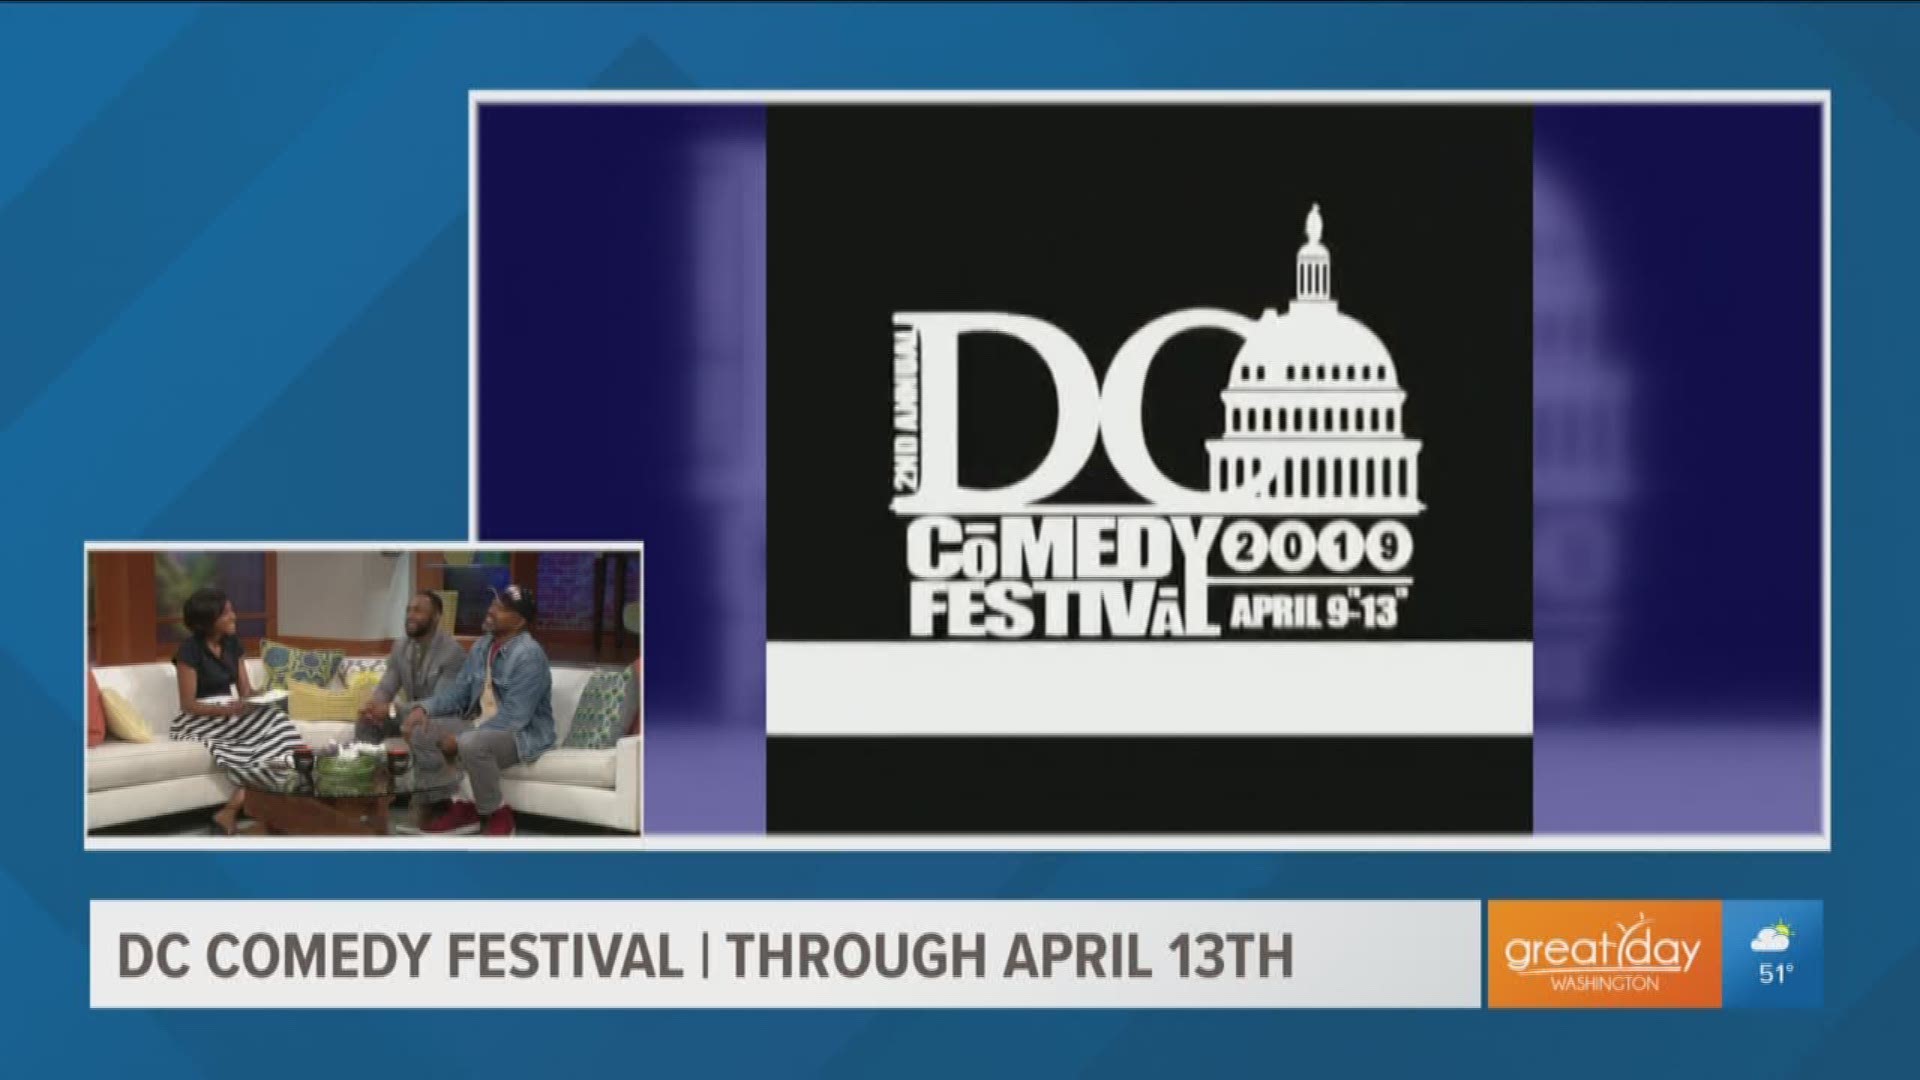 With over 200 comedians performing at multiple venues the DC Comedy Festival promoters promise  this will be one of the "funniest networking comedy festivals this year." Event organizer & comedians, Rob Gordon and Tony Woods share more information.